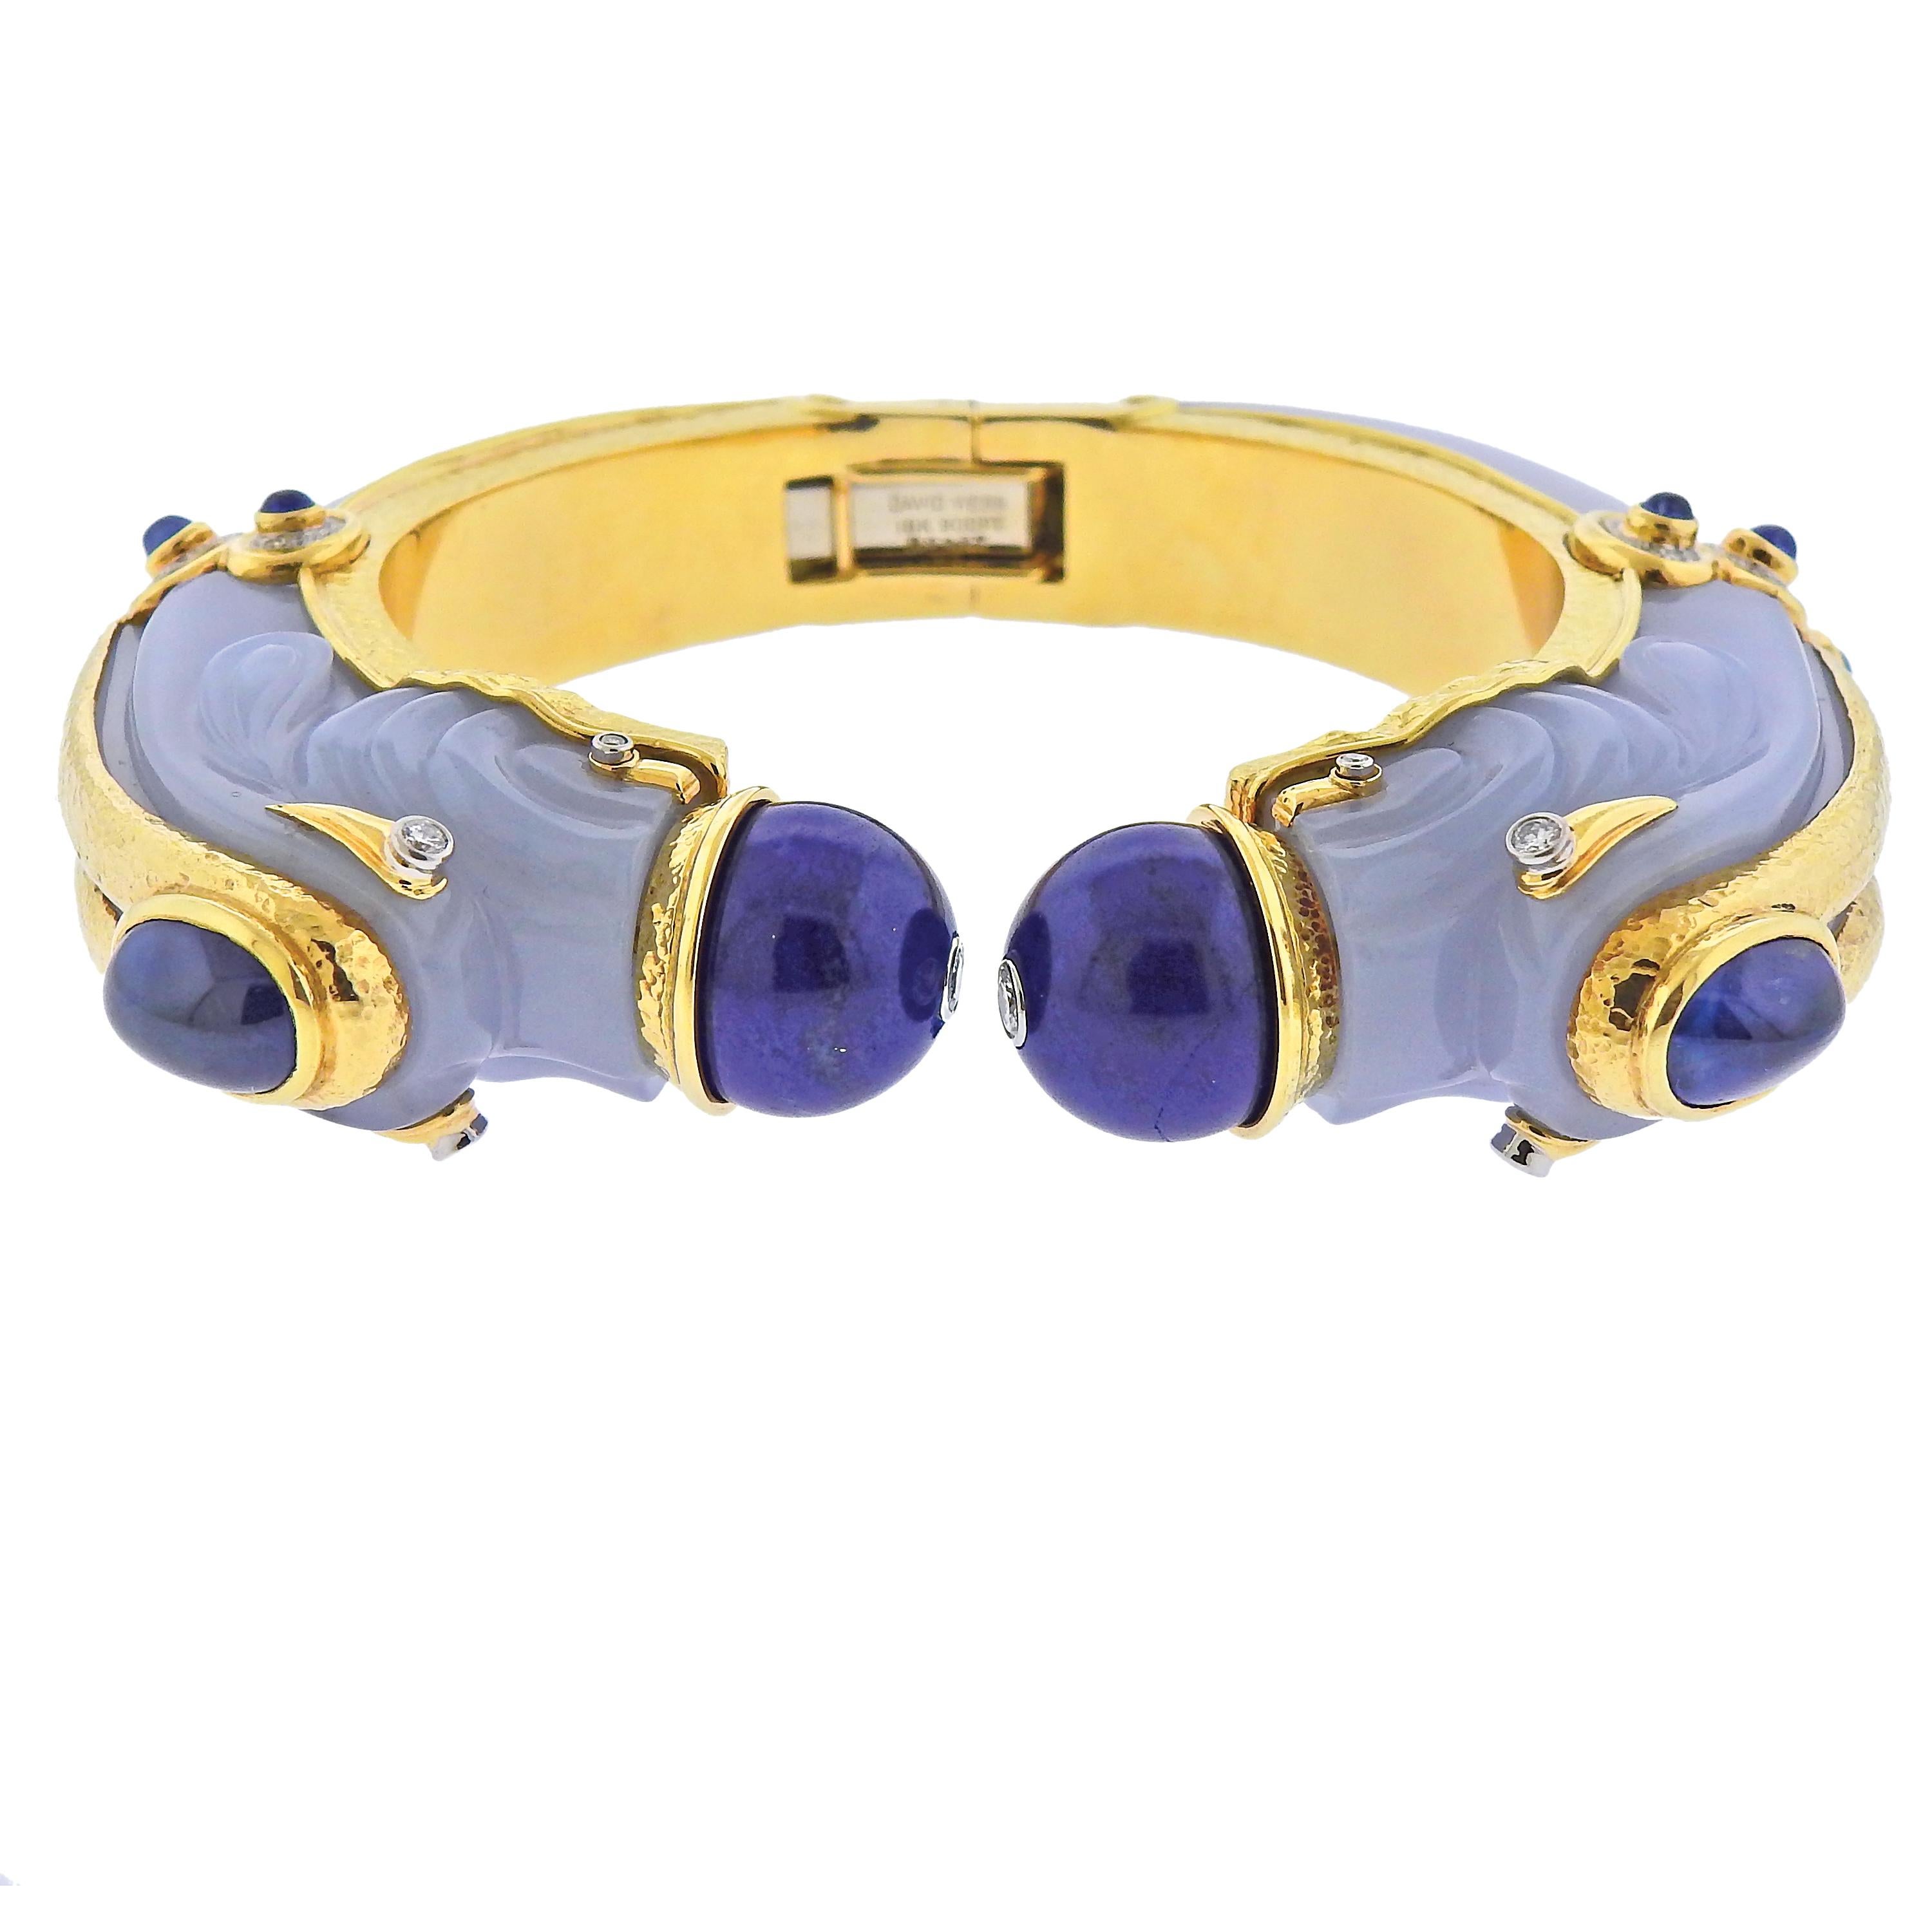 Impressive 18k gold and platinum Chimera bracelet by David Webb, with carved chalcedony, lapis lazuli, sapphires and approx. 0.30cts in H/VS-SI1 diamonds.   Cuff will fit approx. 7-7.25